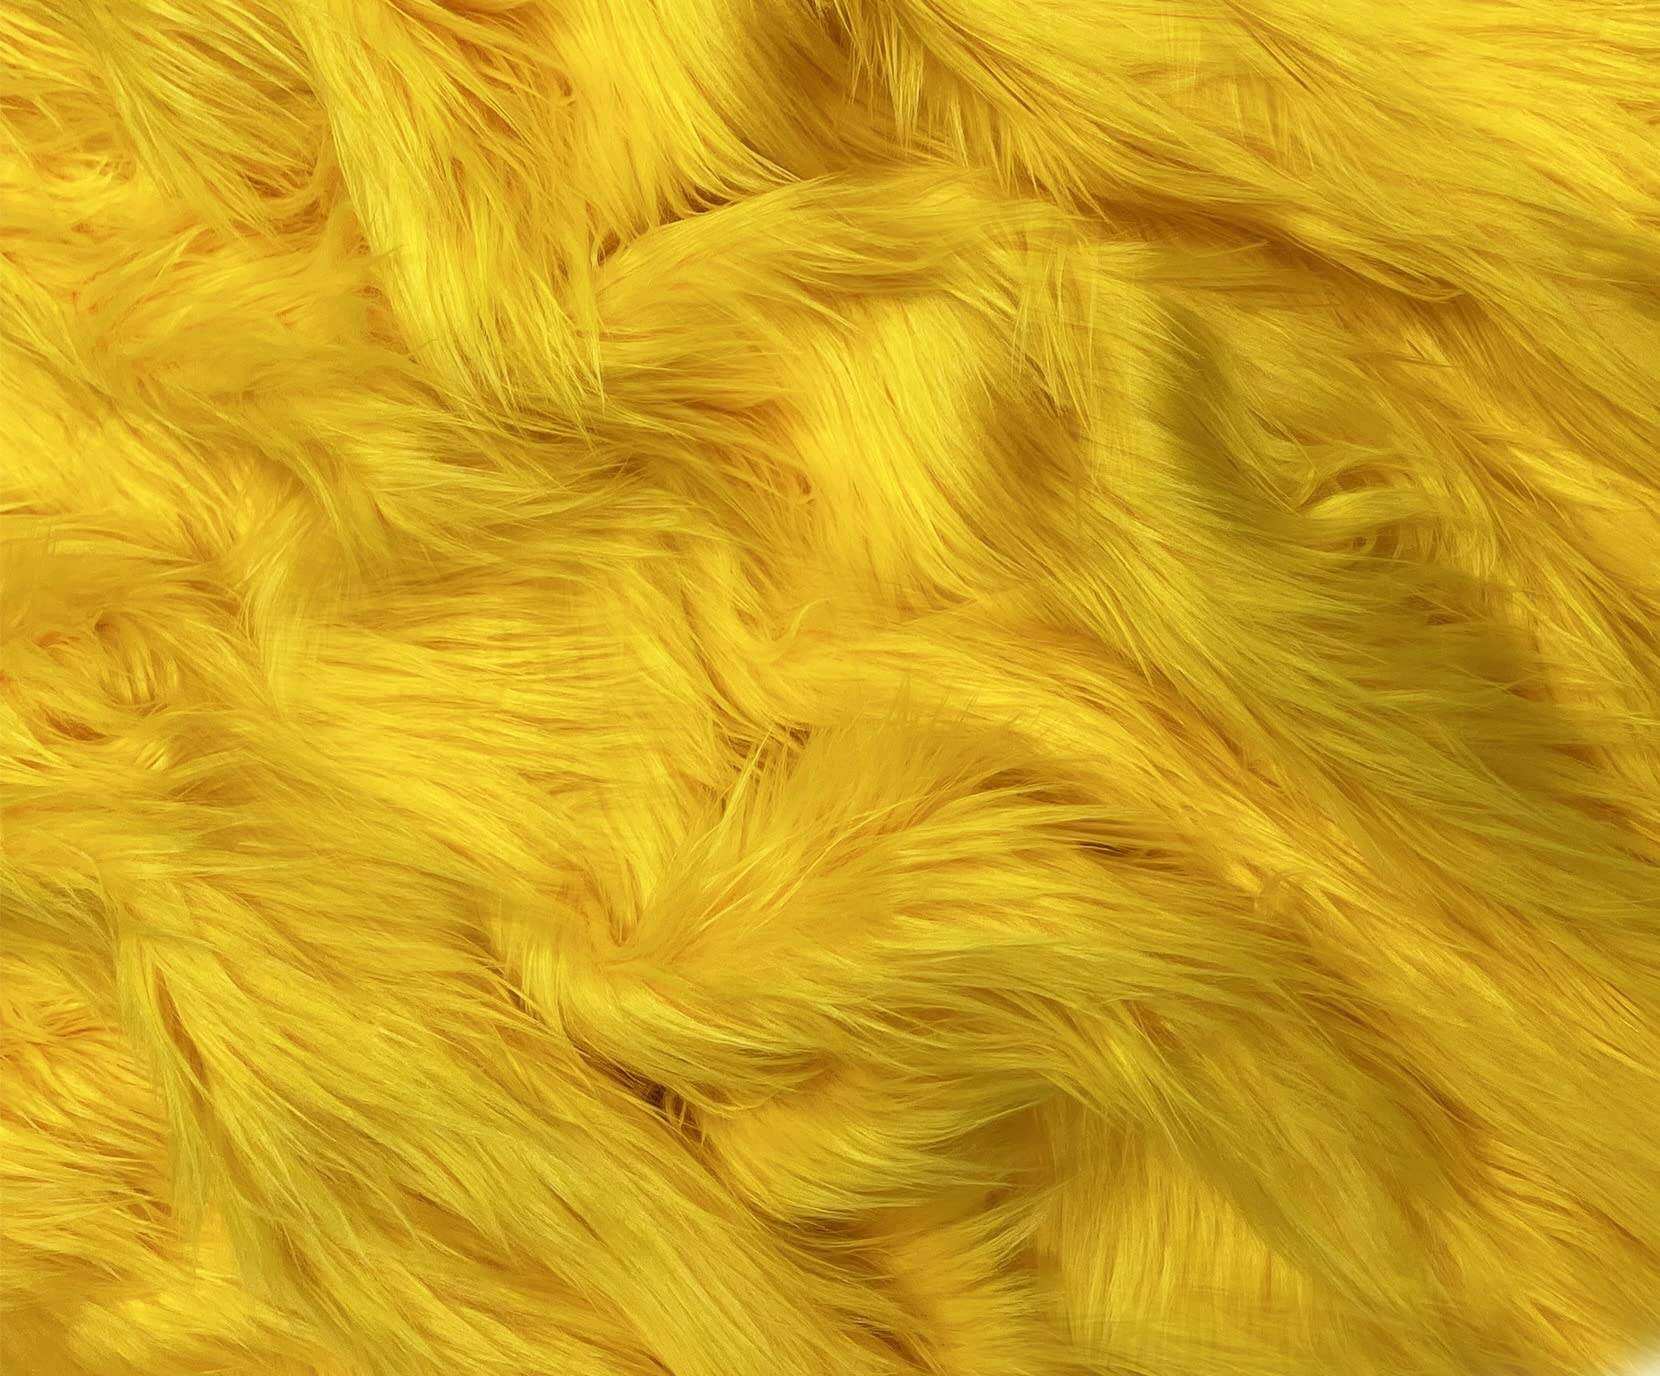 Eovea - Shaggy Faux Fur Fabric - 2 Yards - 72 X 60 Inches - Yellow - Apparel, DIY craft Supply, Hobby, costume, Decoration, Shaw